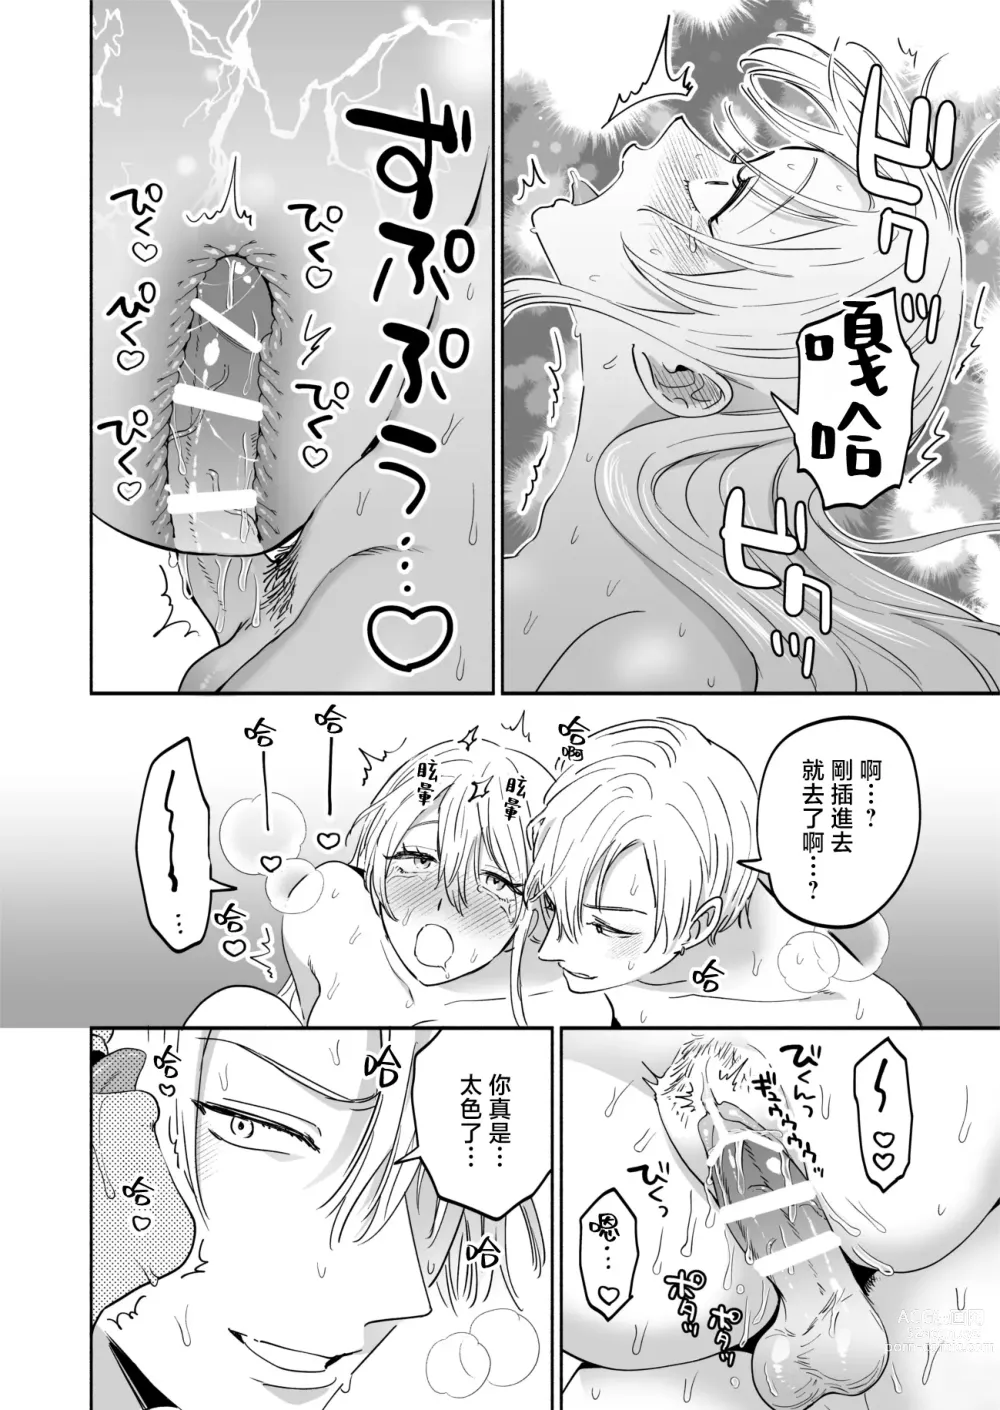 Page 16 of doujinshi 炮友的独占欲